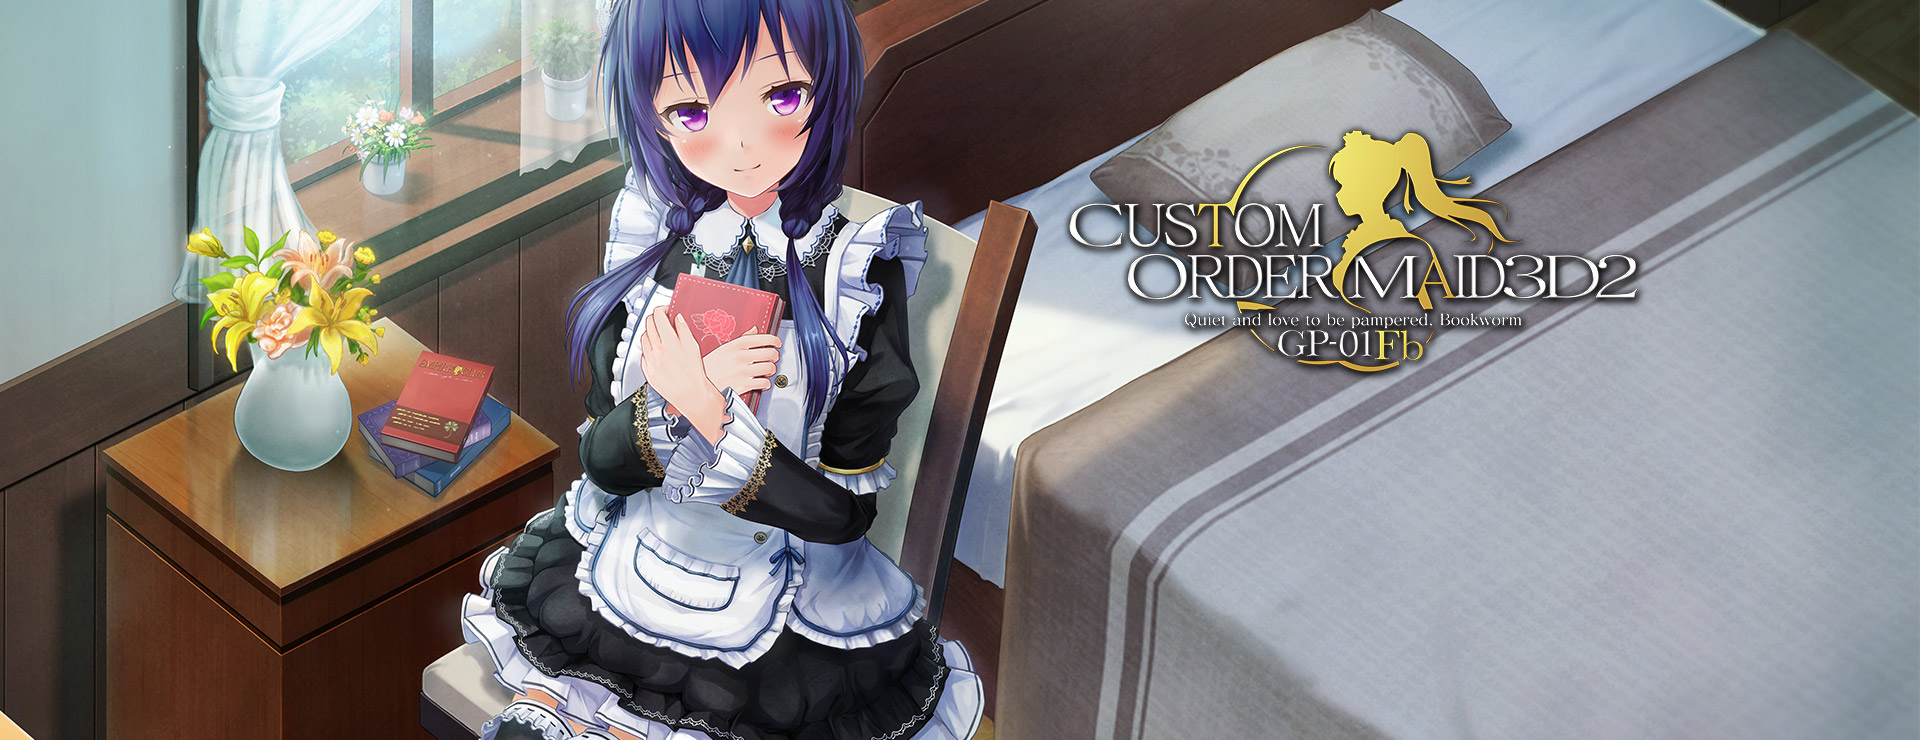 Custom Order Maid 3D2 - Quiet and love to be pampered Bookworm GP-01Fb DLC - Symulacja Gra